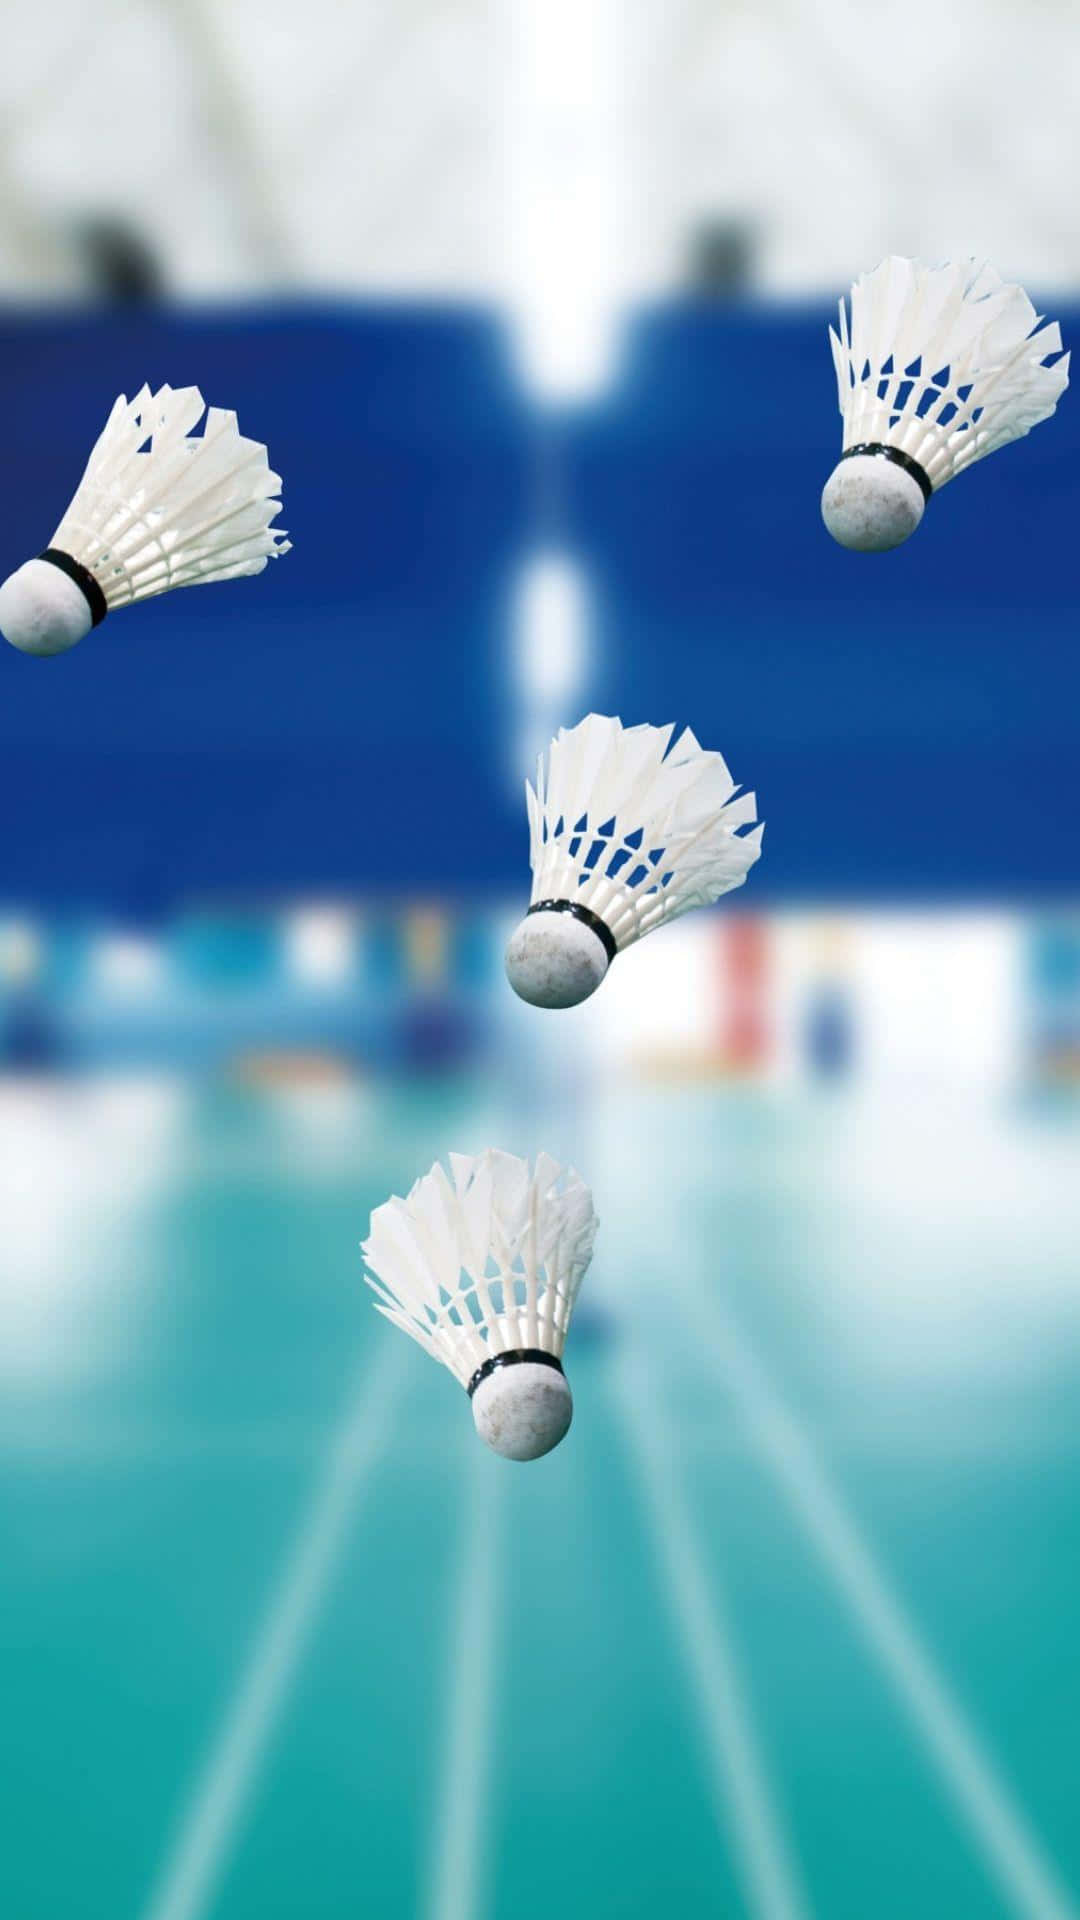 Improve your badminton skills with Android